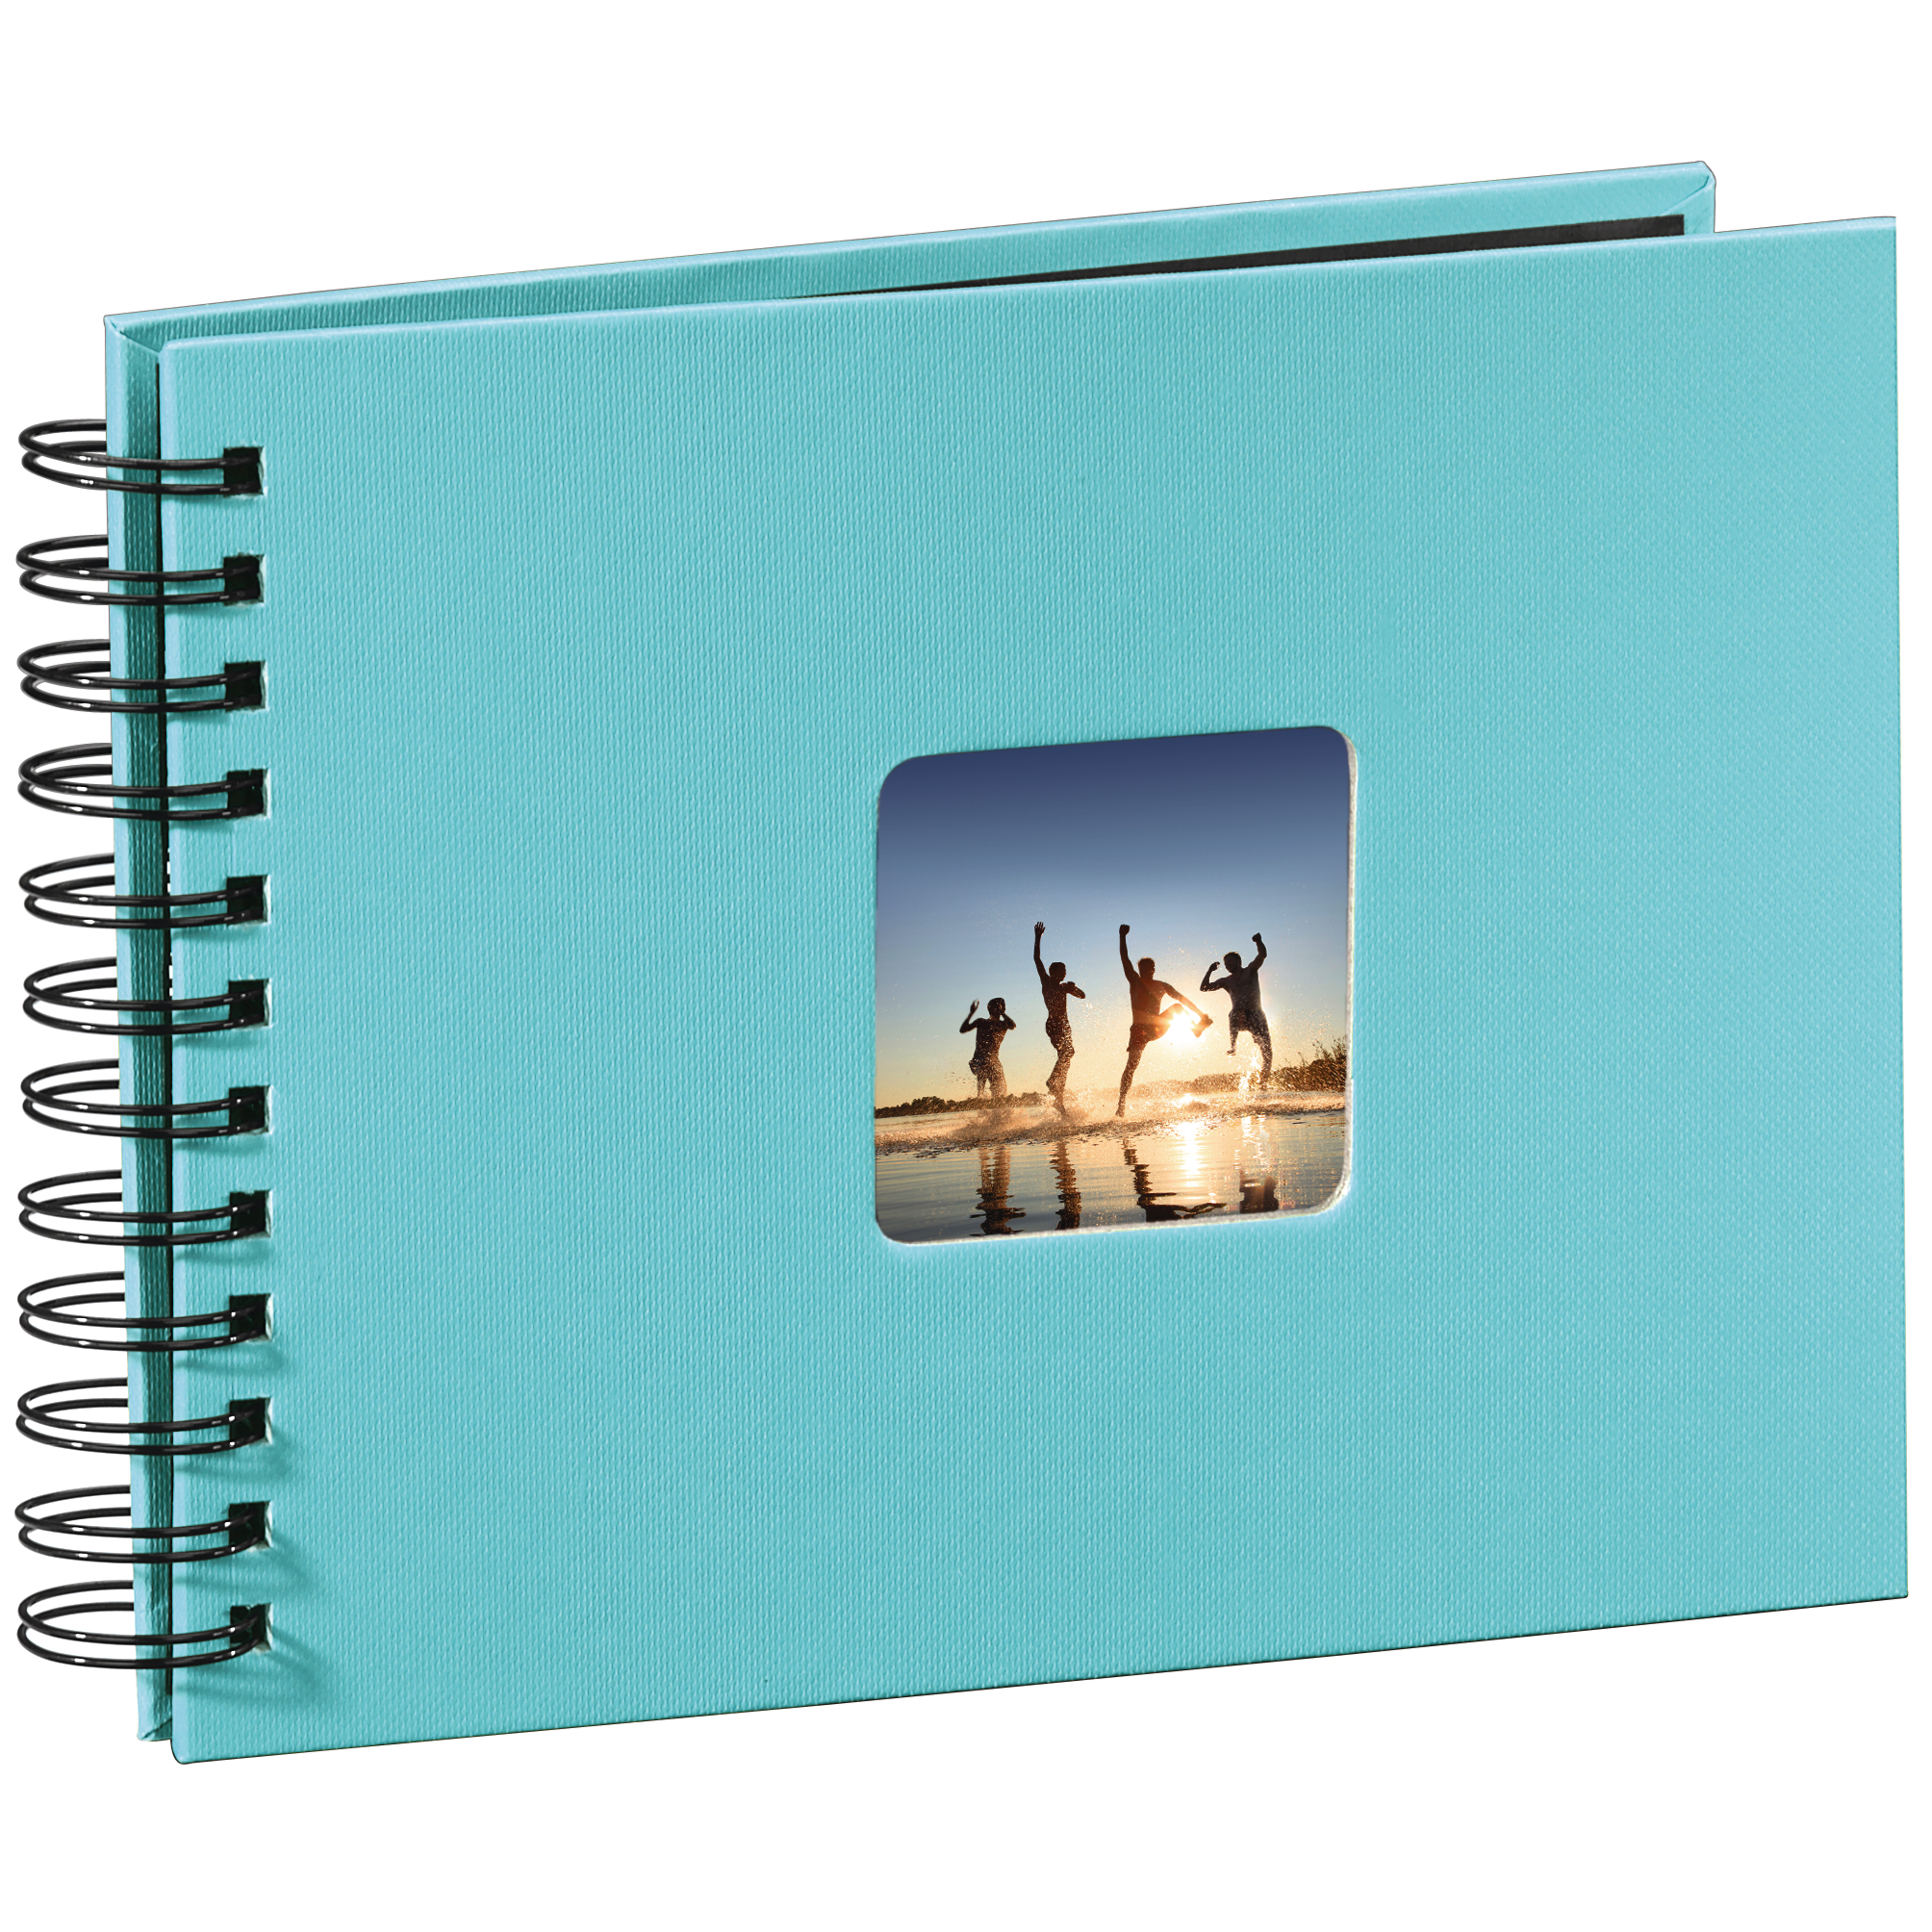 HAMA Album Fine Art 113673 240x170mm, turquoise 25 pages 240x170mm, turquoise 25 pages